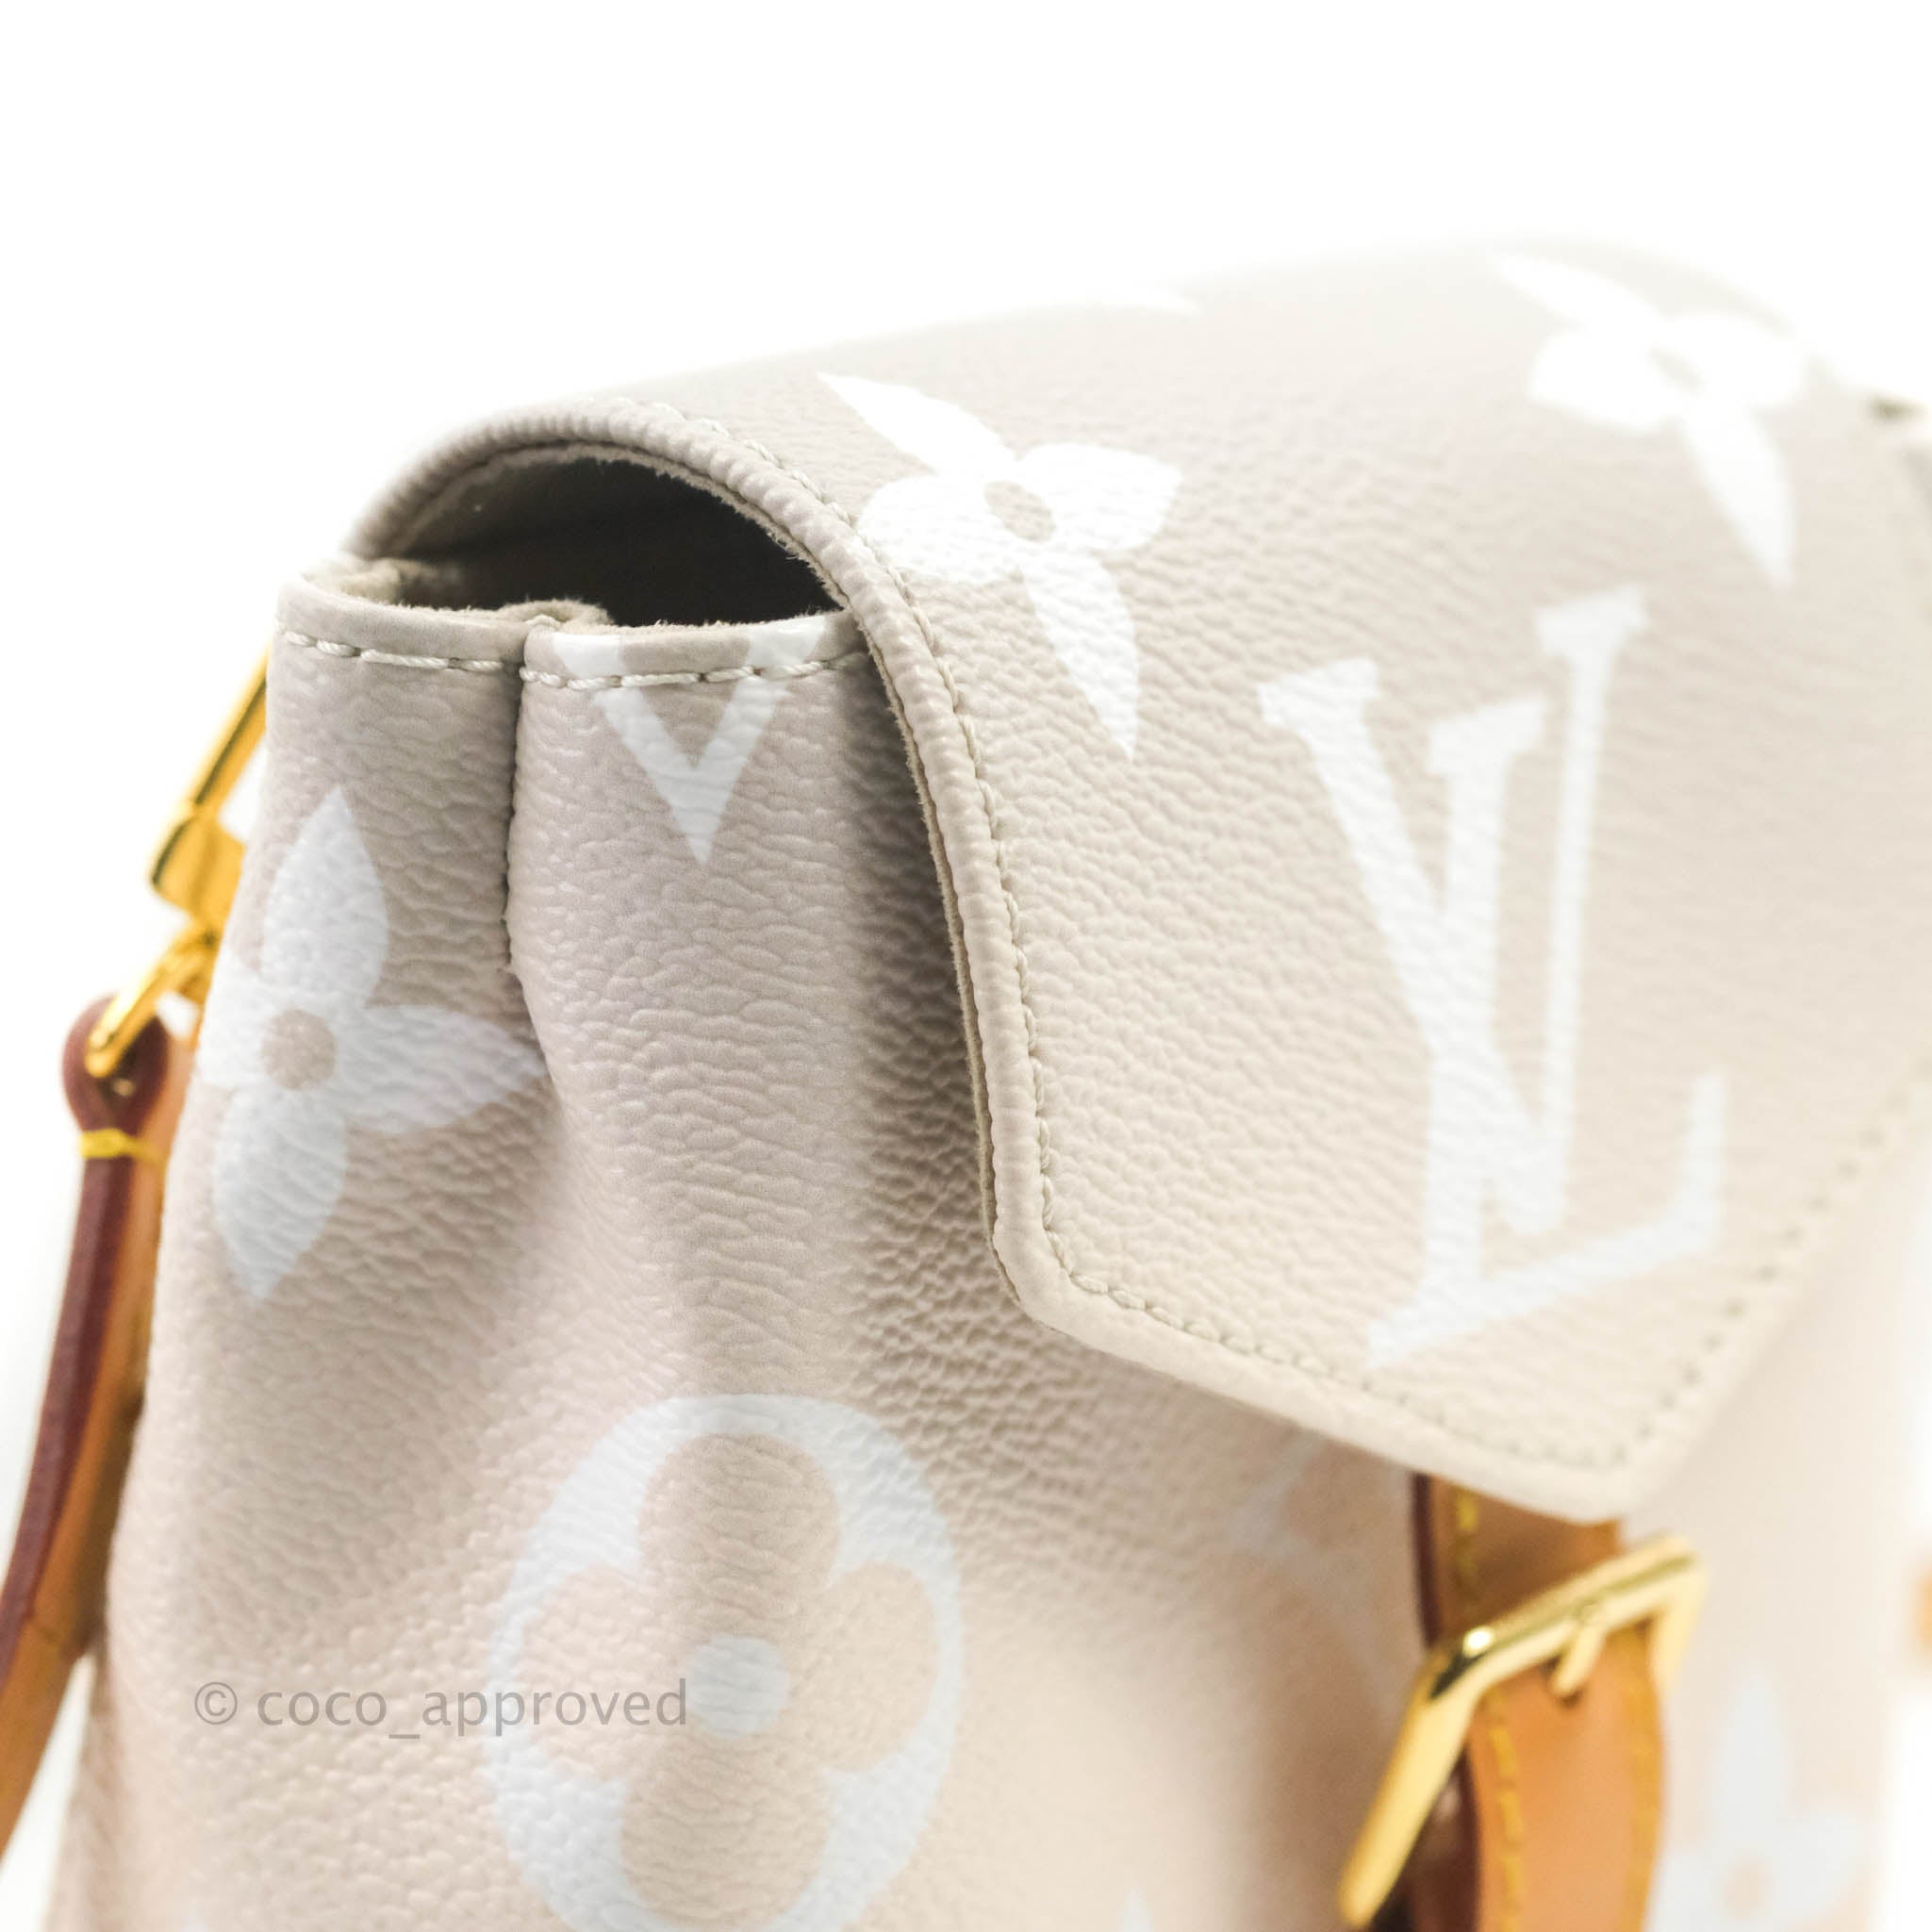 Tiny Backpack Monogram Empreinte Leather - Wallets and Small Leather Goods